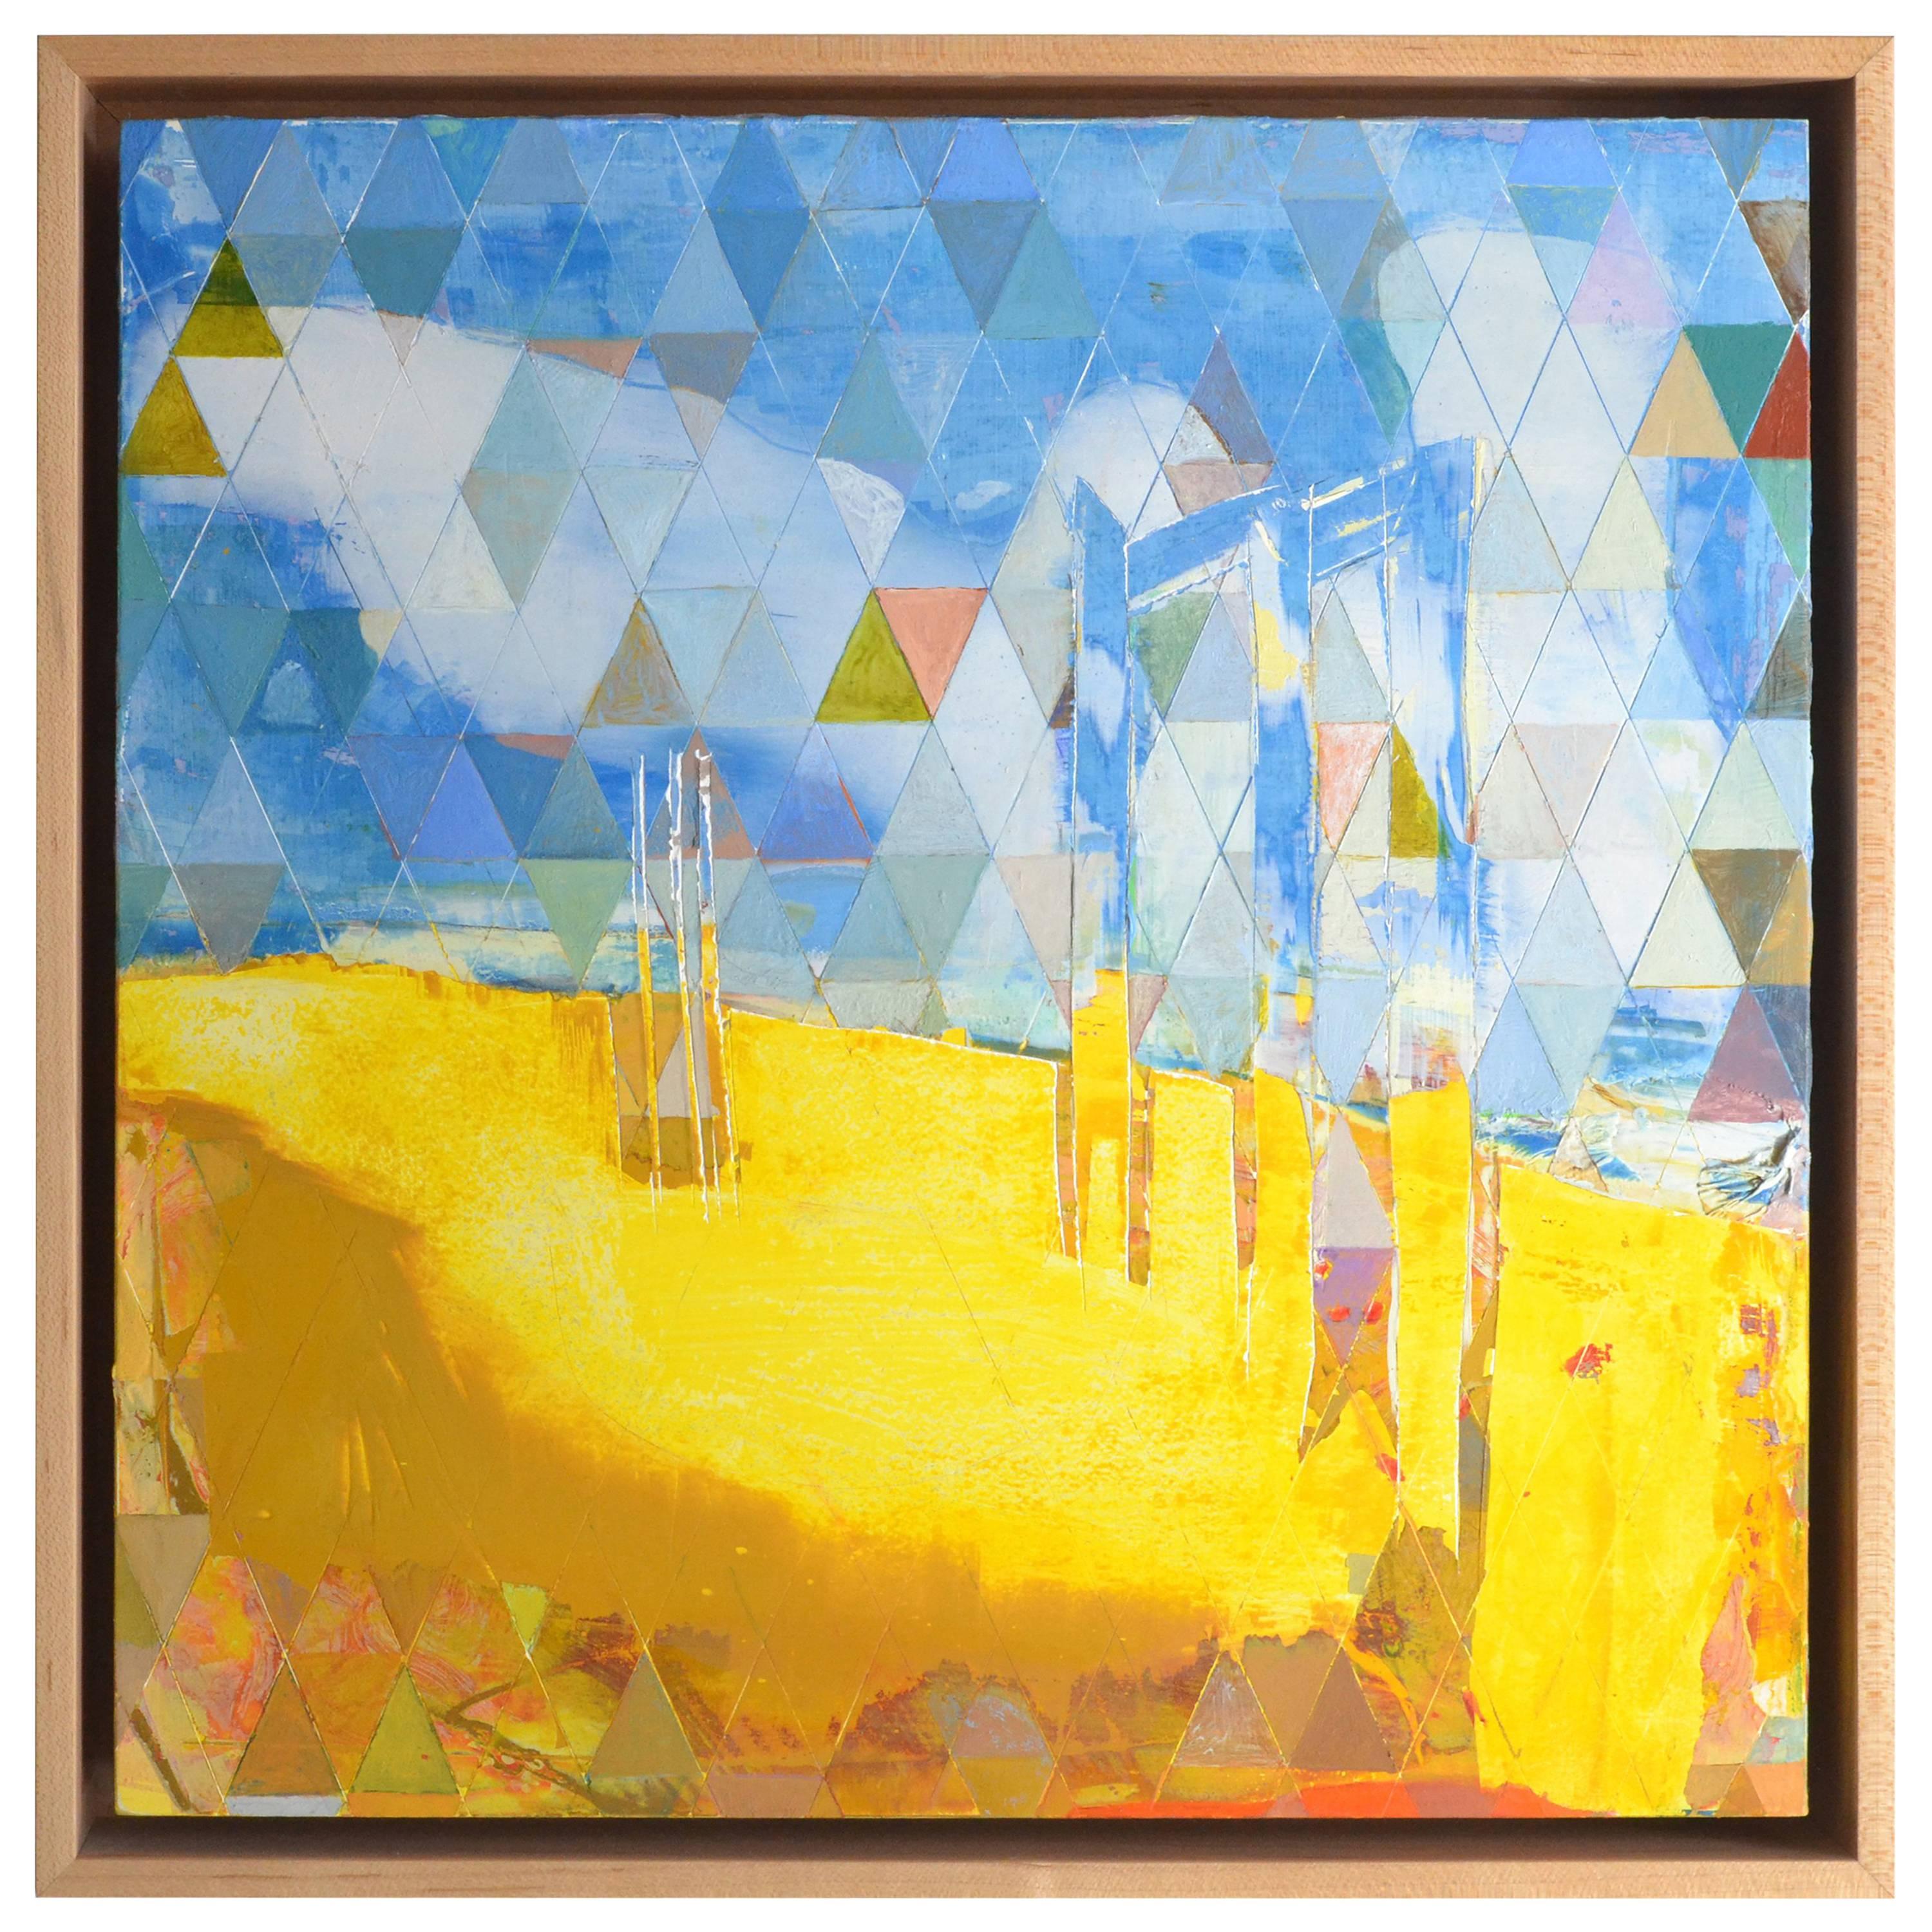 Robert Katkowski "Relics" Contemporary Abstract Painting For Sale